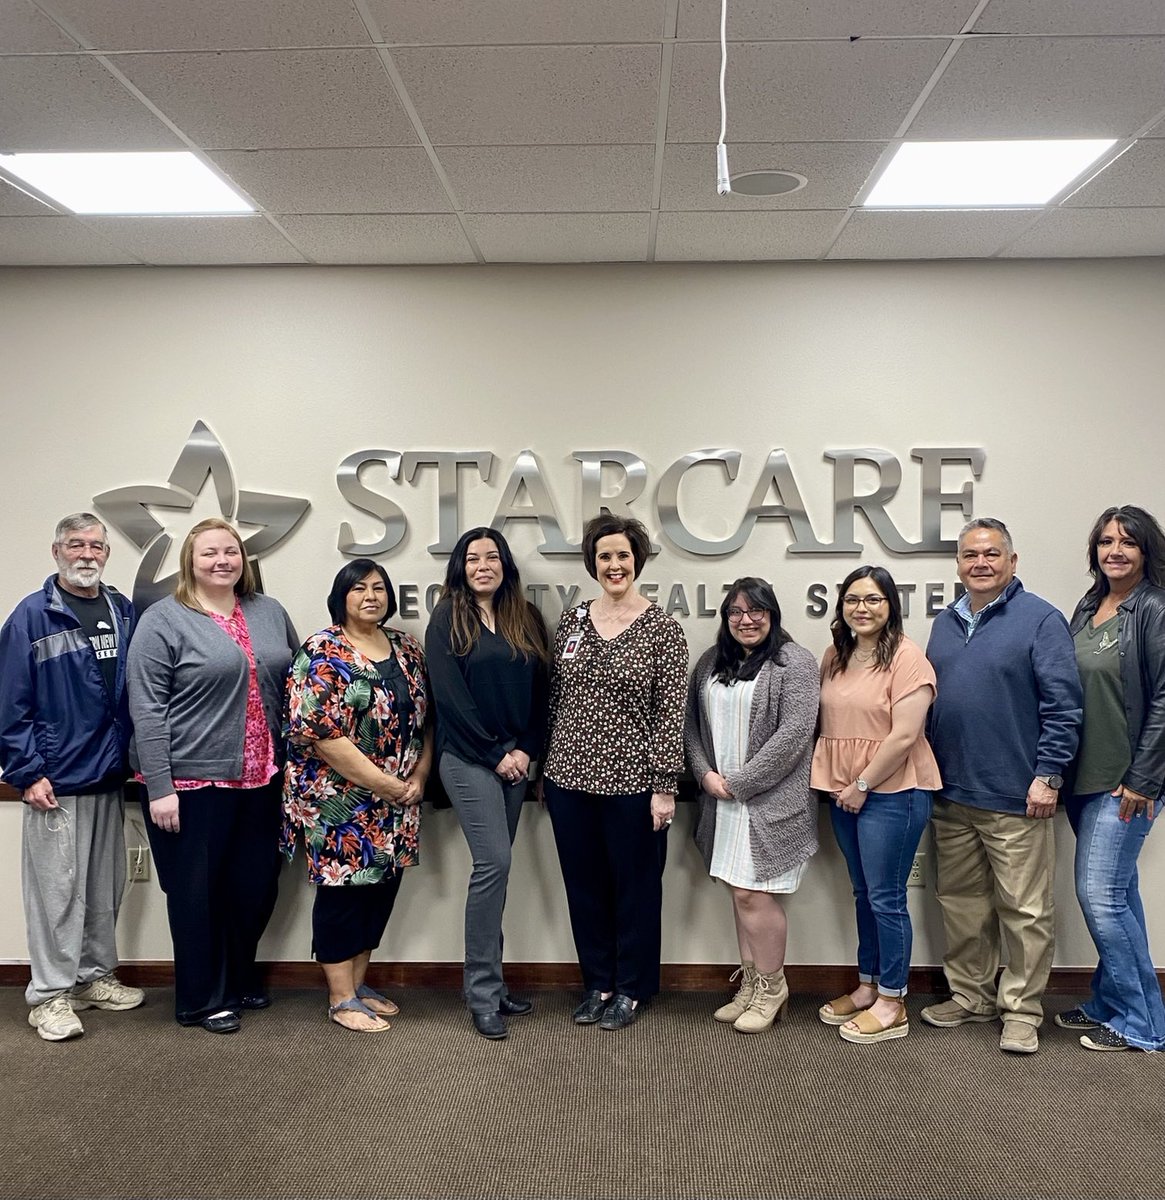 What a great way to start the week! ⁦@starcarelubbock⁩ welcomes our newest team members! #HopeAndHealth #PoweredbyLBK